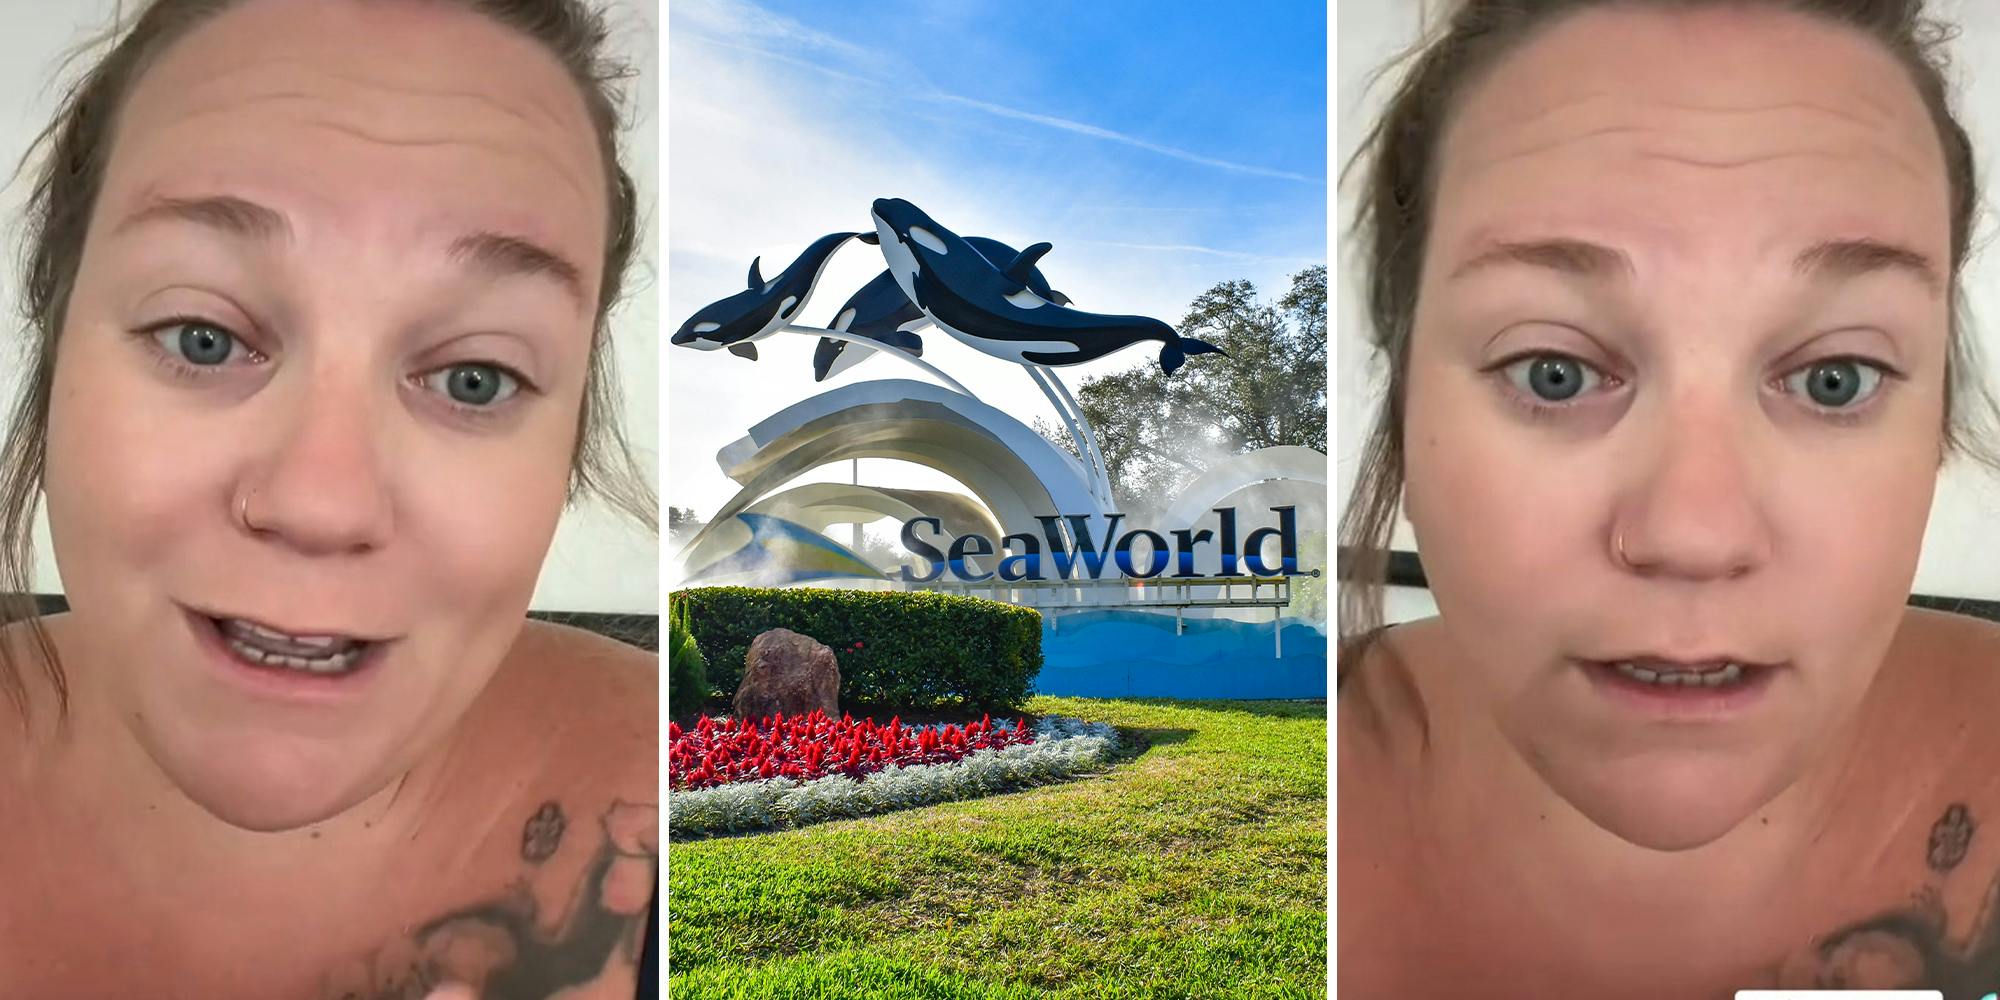 Sea World customer calls out Aquatic water park after nightmare incident